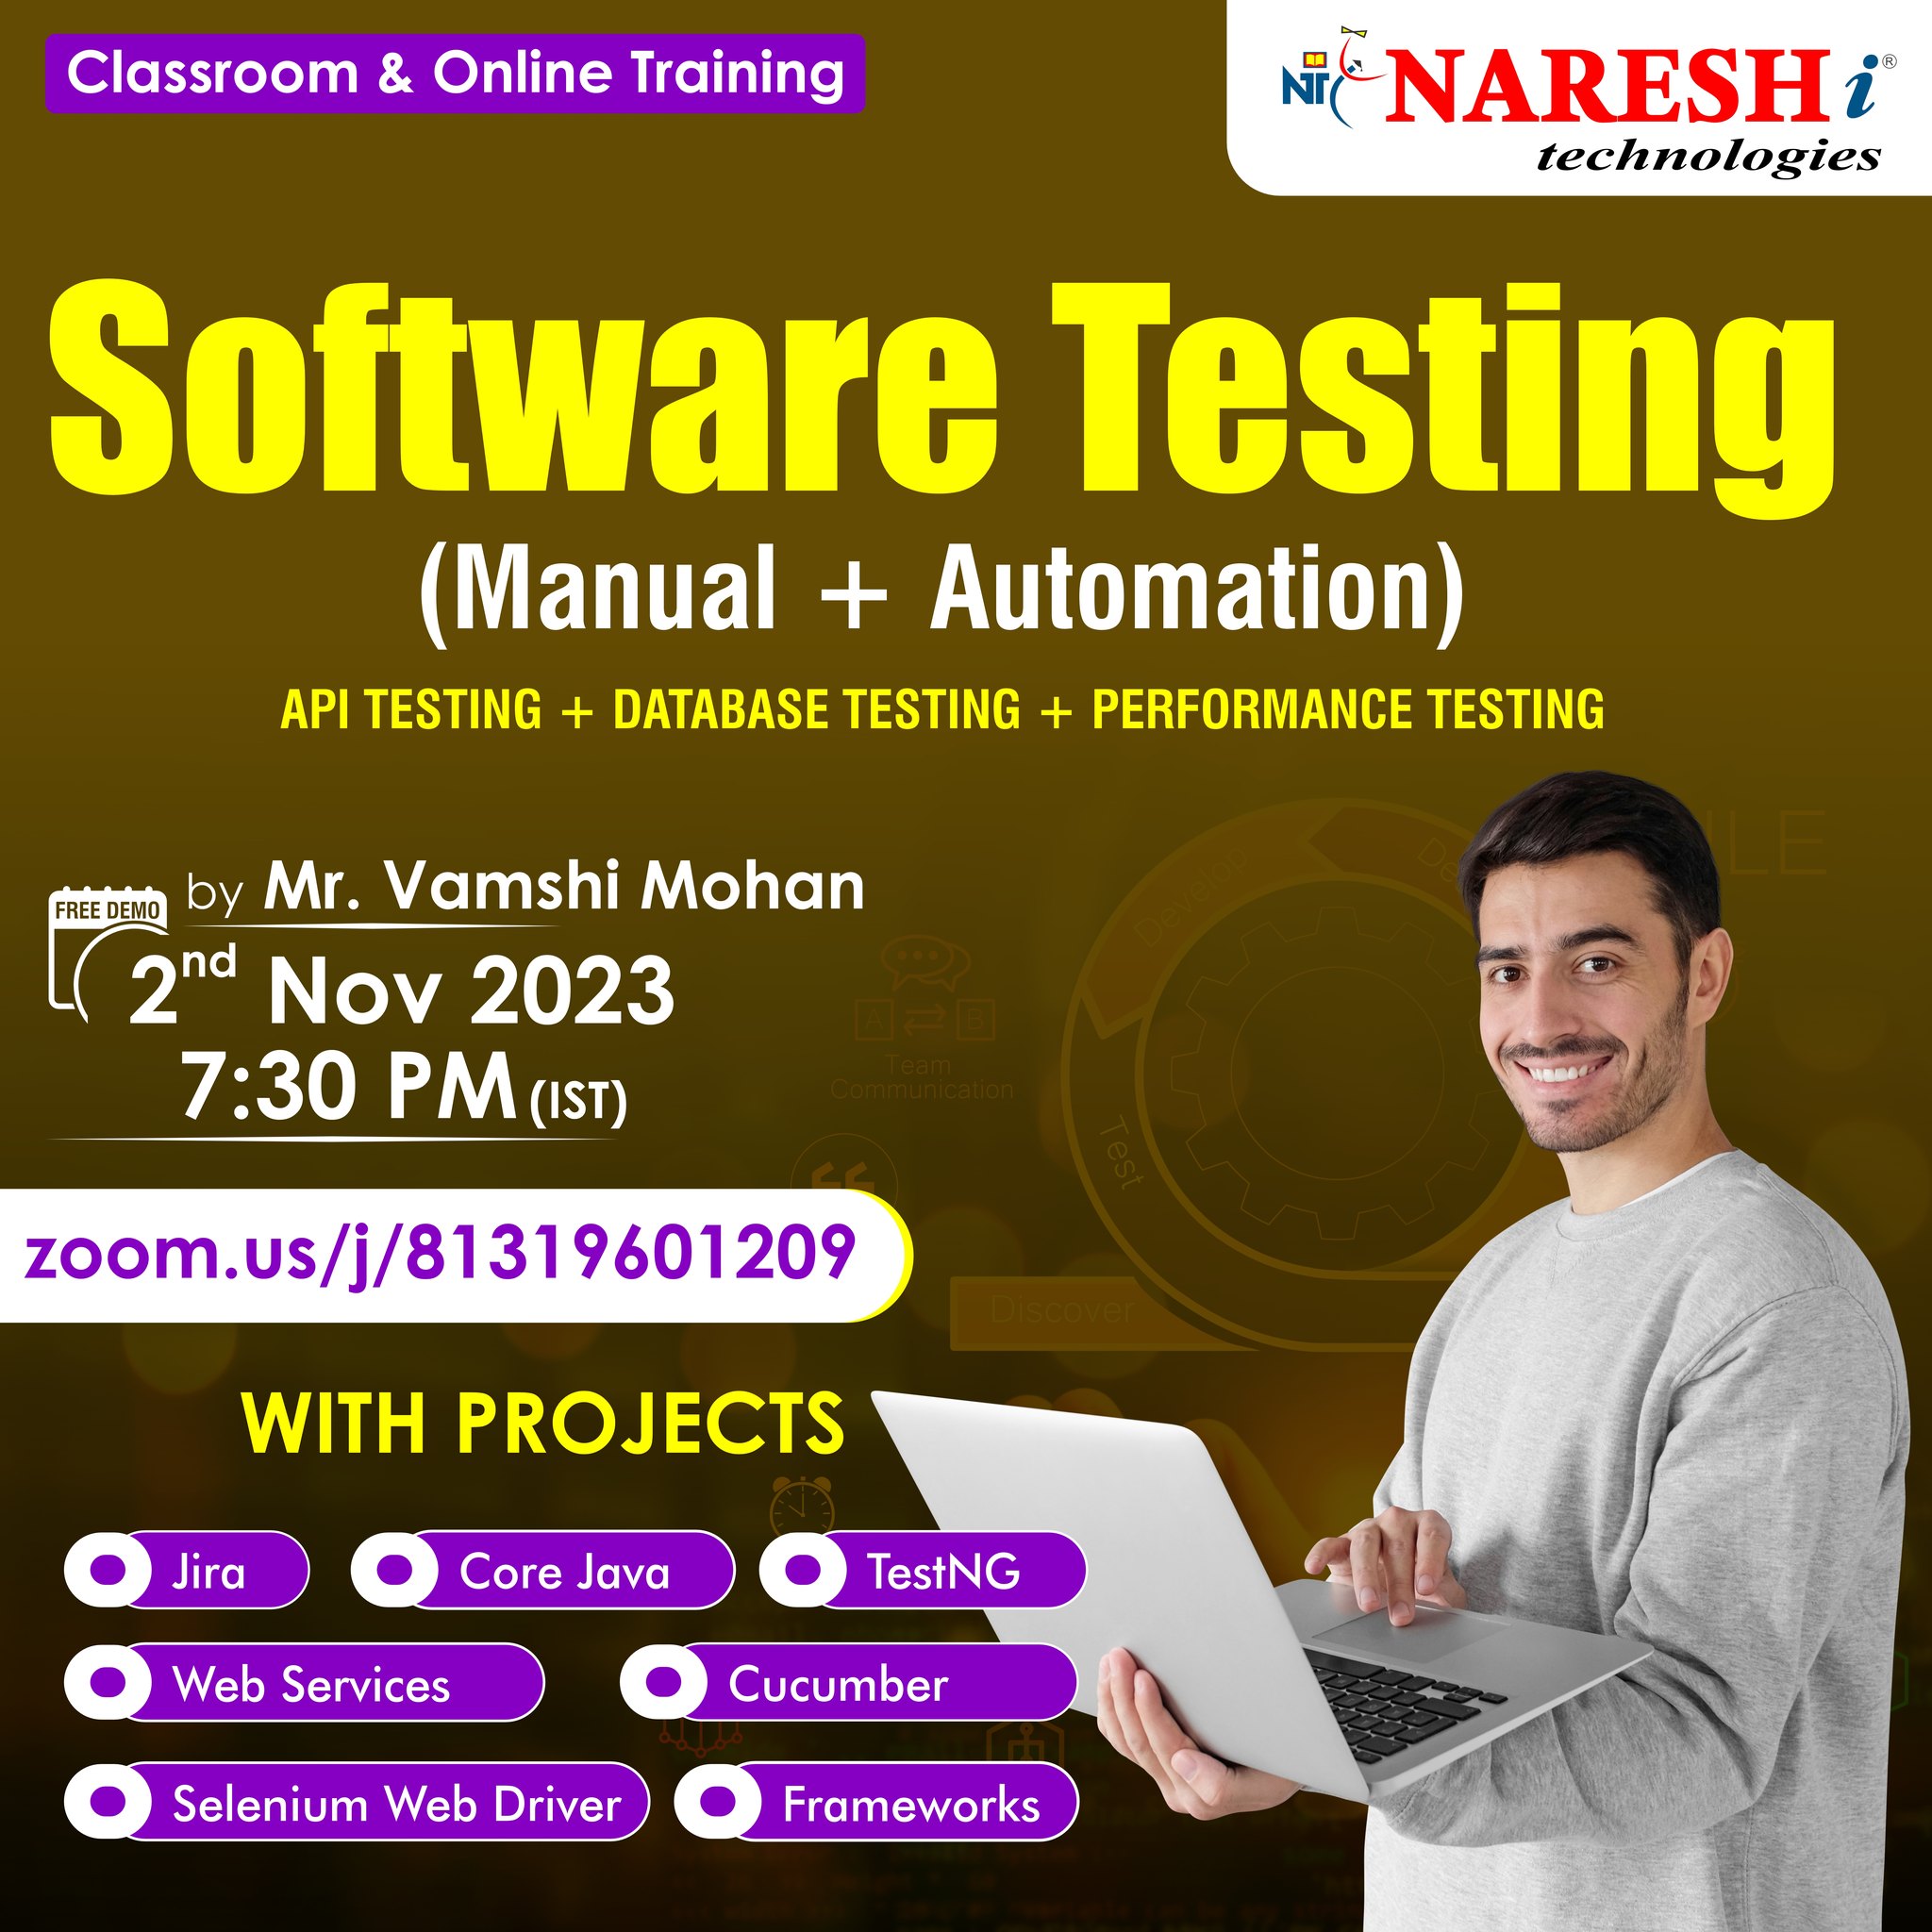 Free Online Demo On Software Testing in NareshIT, Online Event